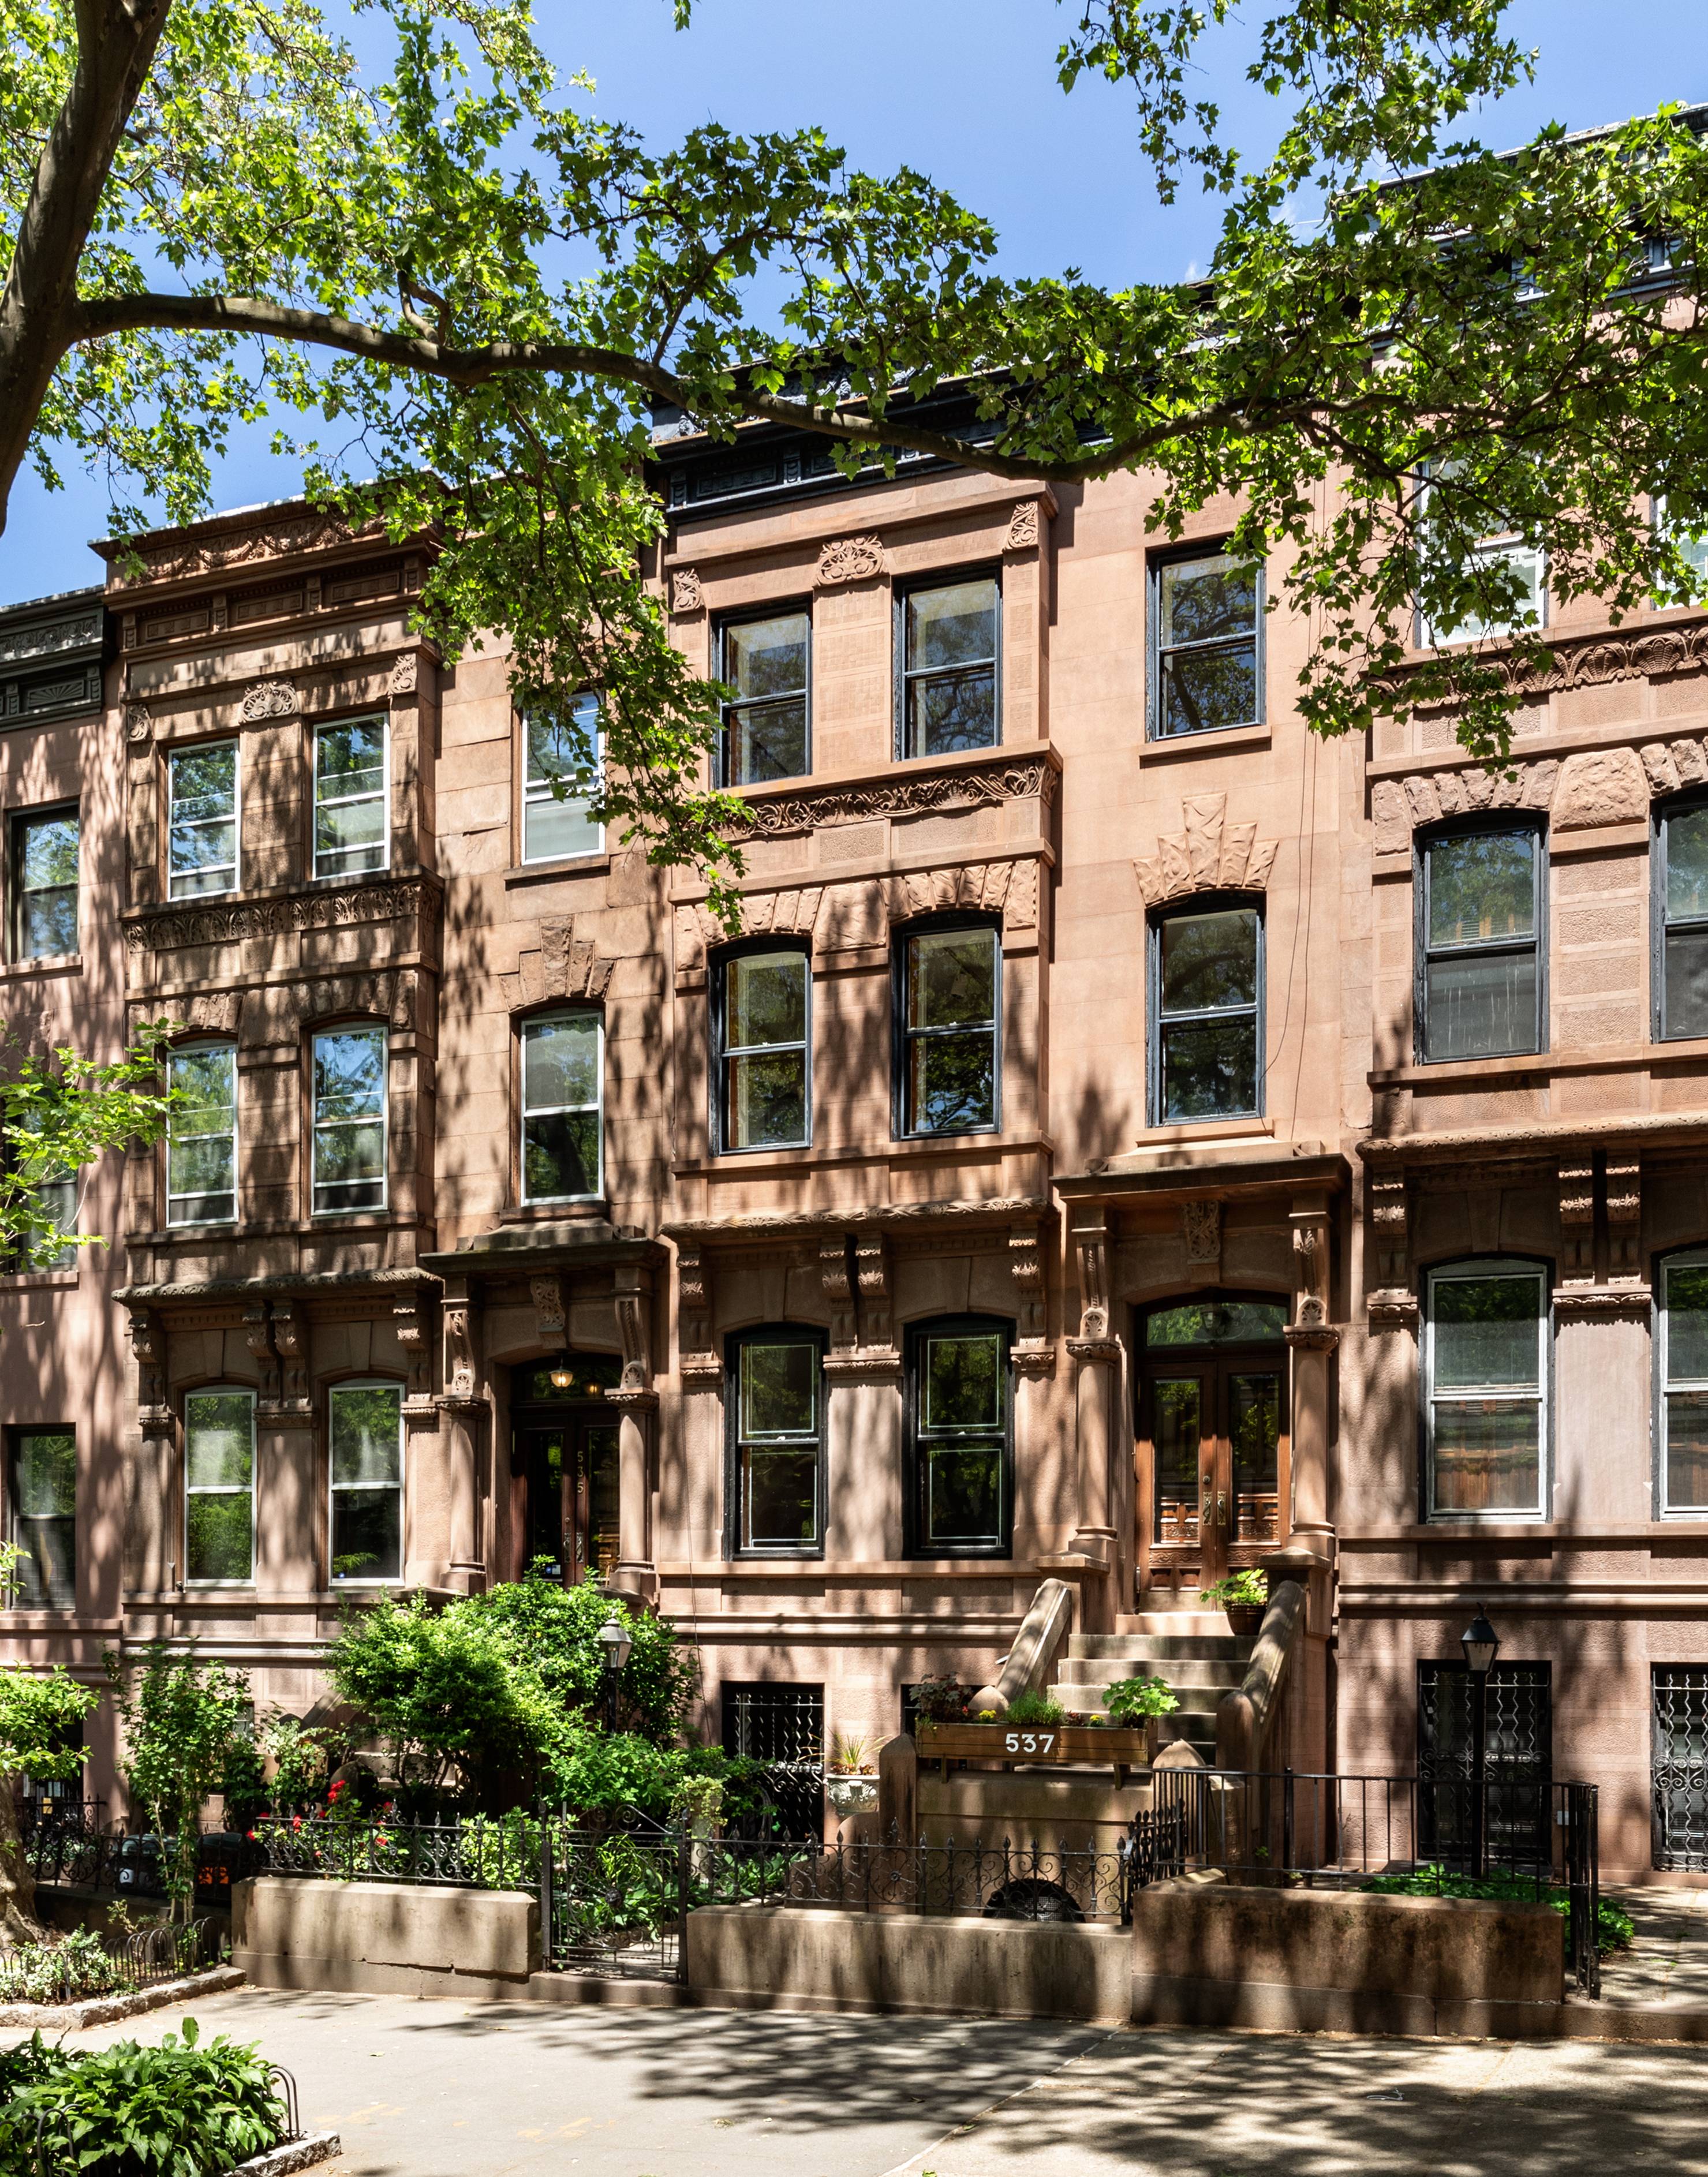 Finally, an opportunity to enjoy life on one of Park Slope's most gorgeous blocks !